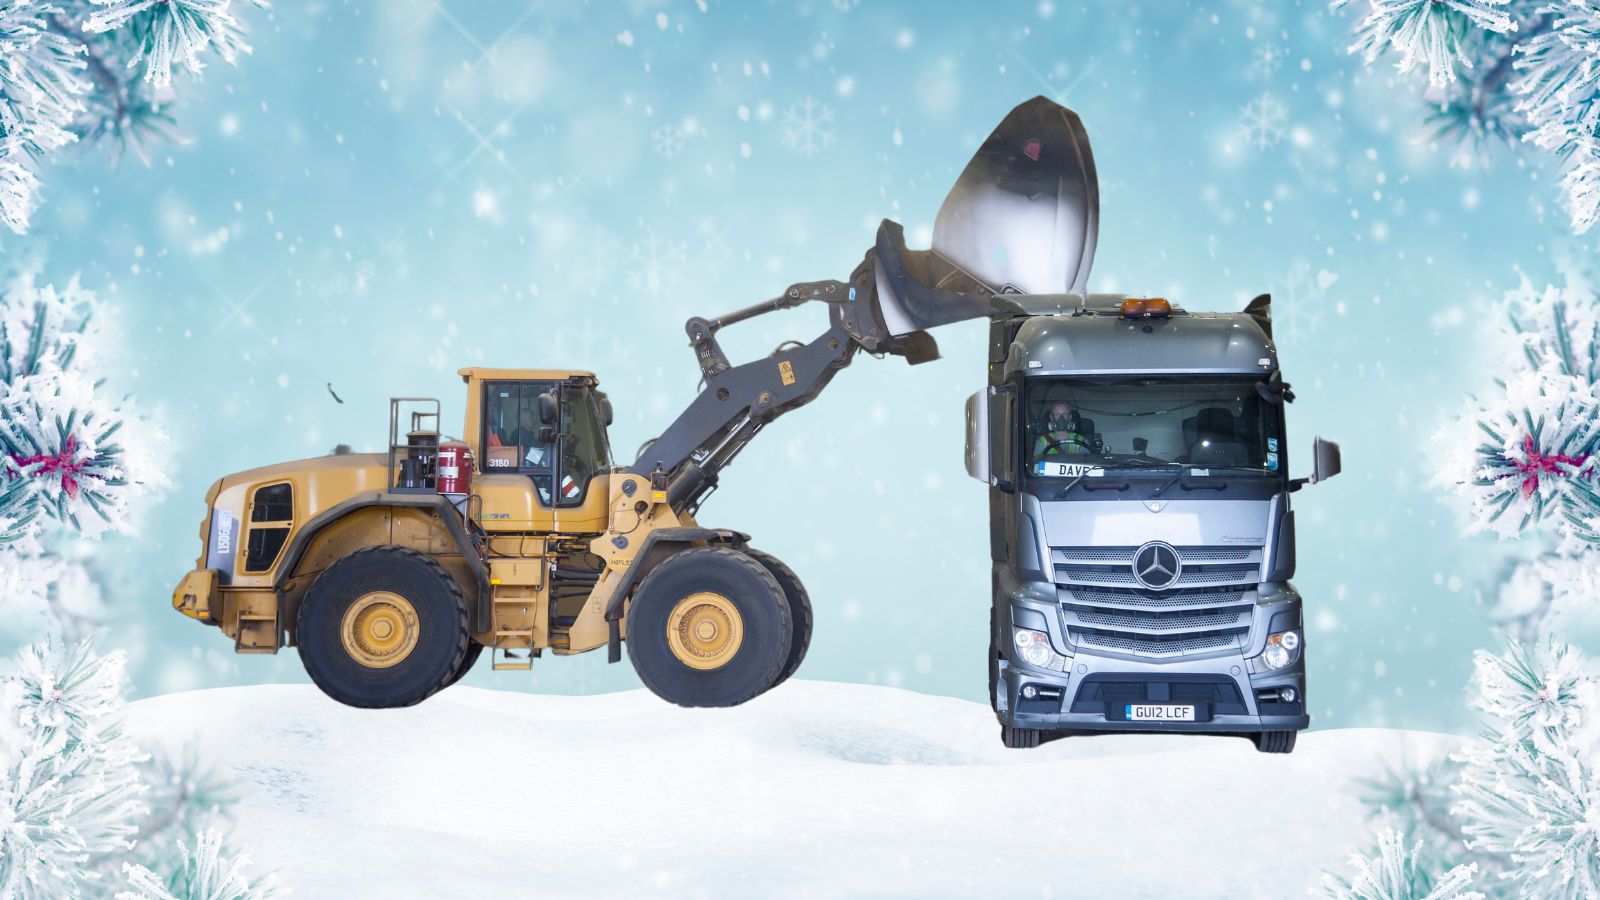 Digger and truck in festive snow scene